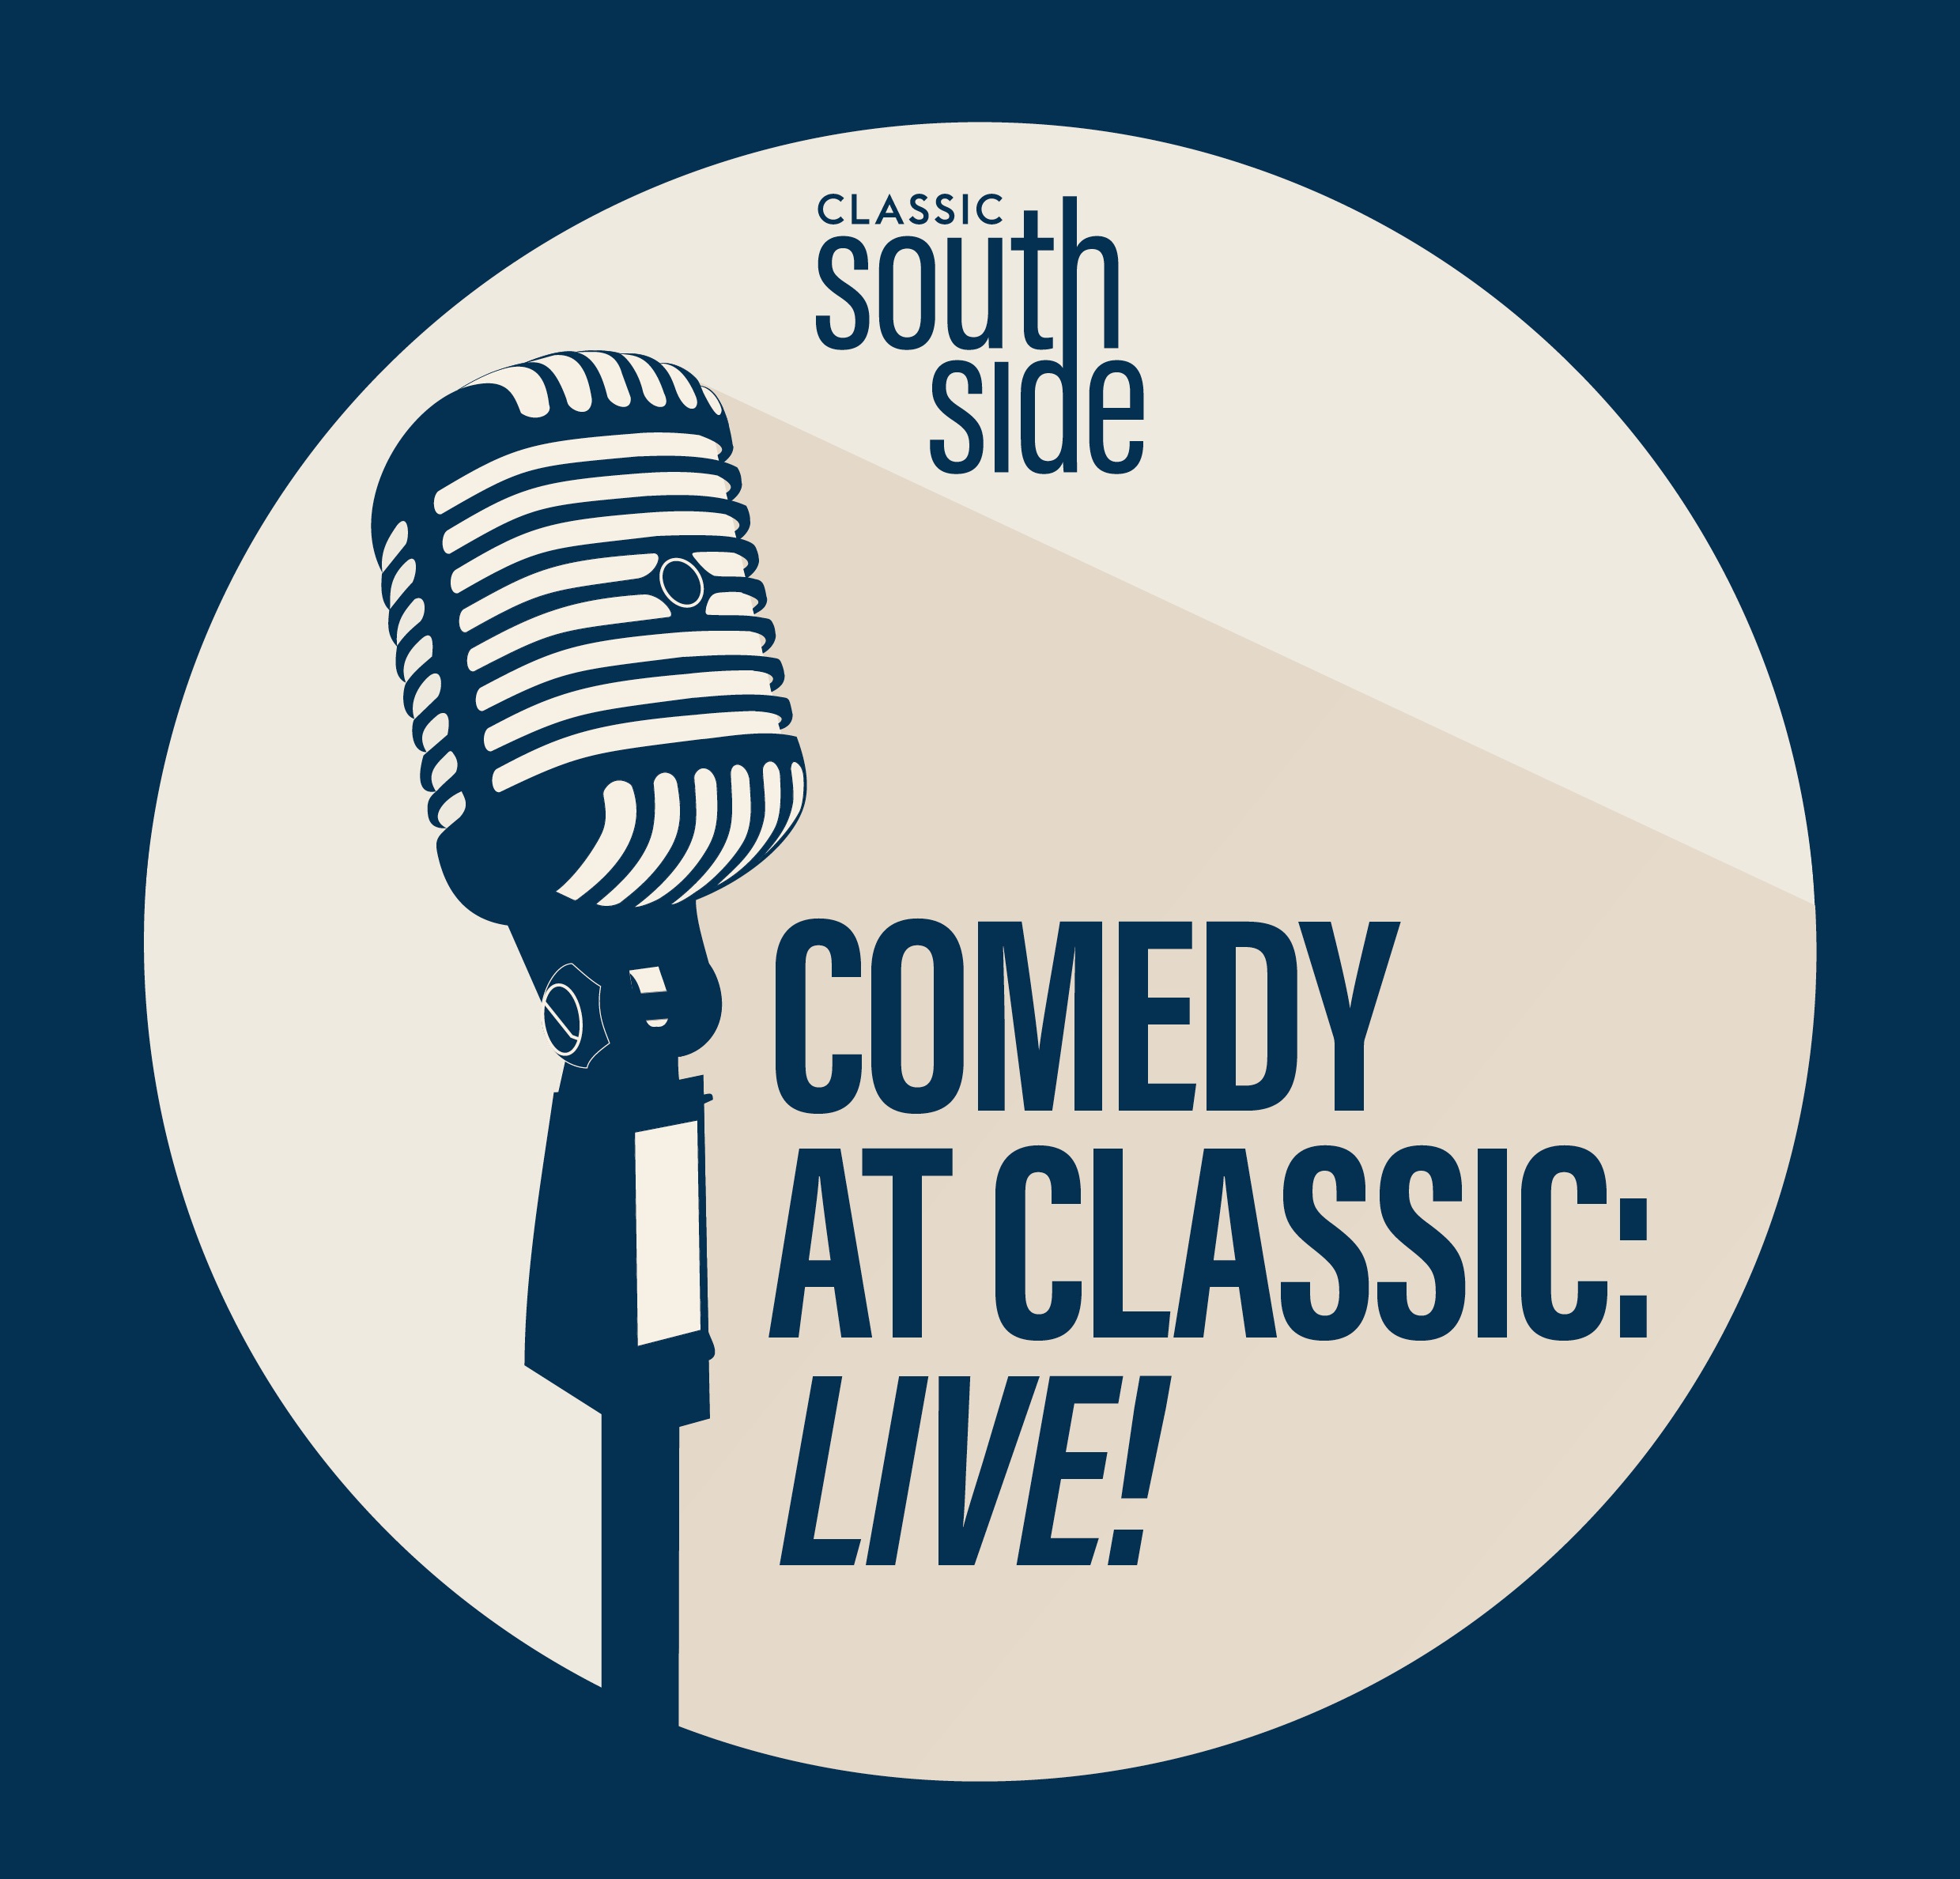 Comedy at Classic